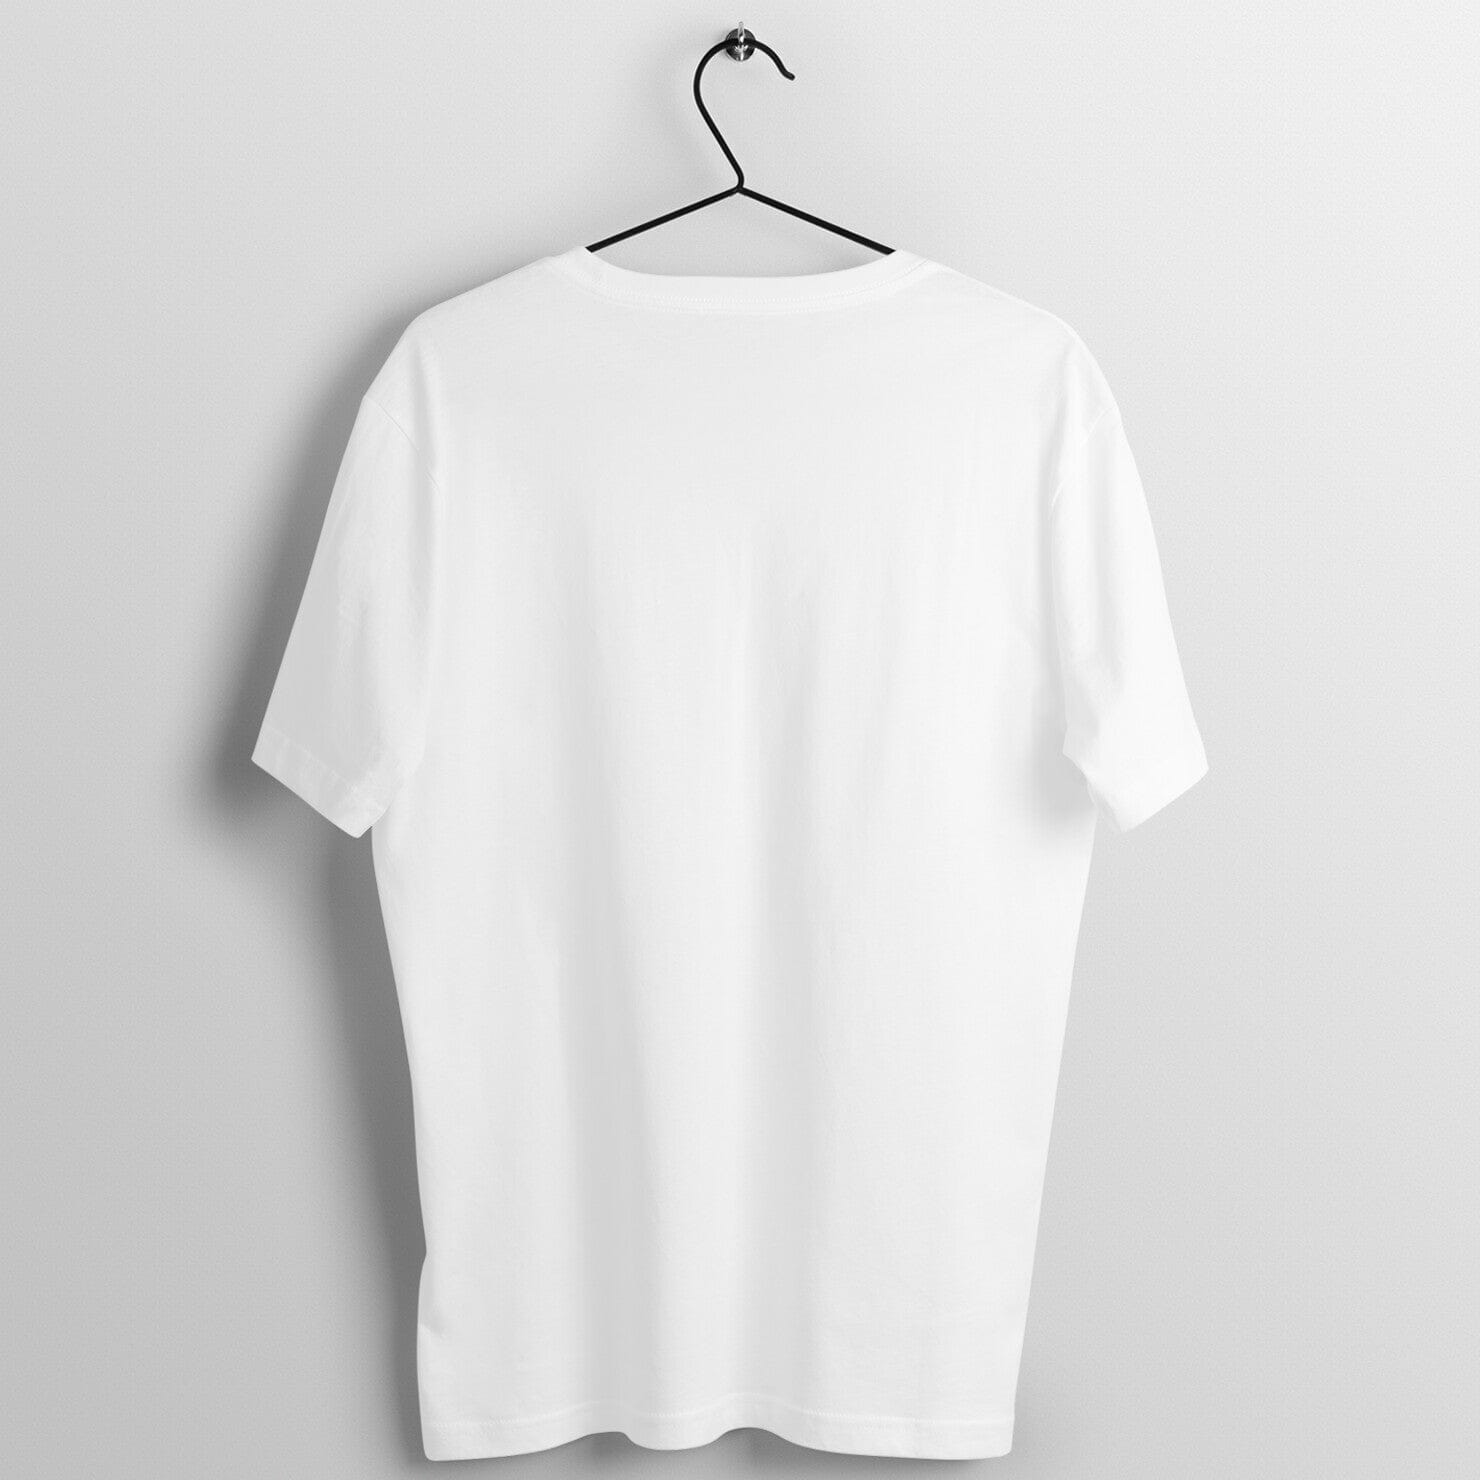 Namaste Exclusive White T Shirt for Men and Women Printrove 